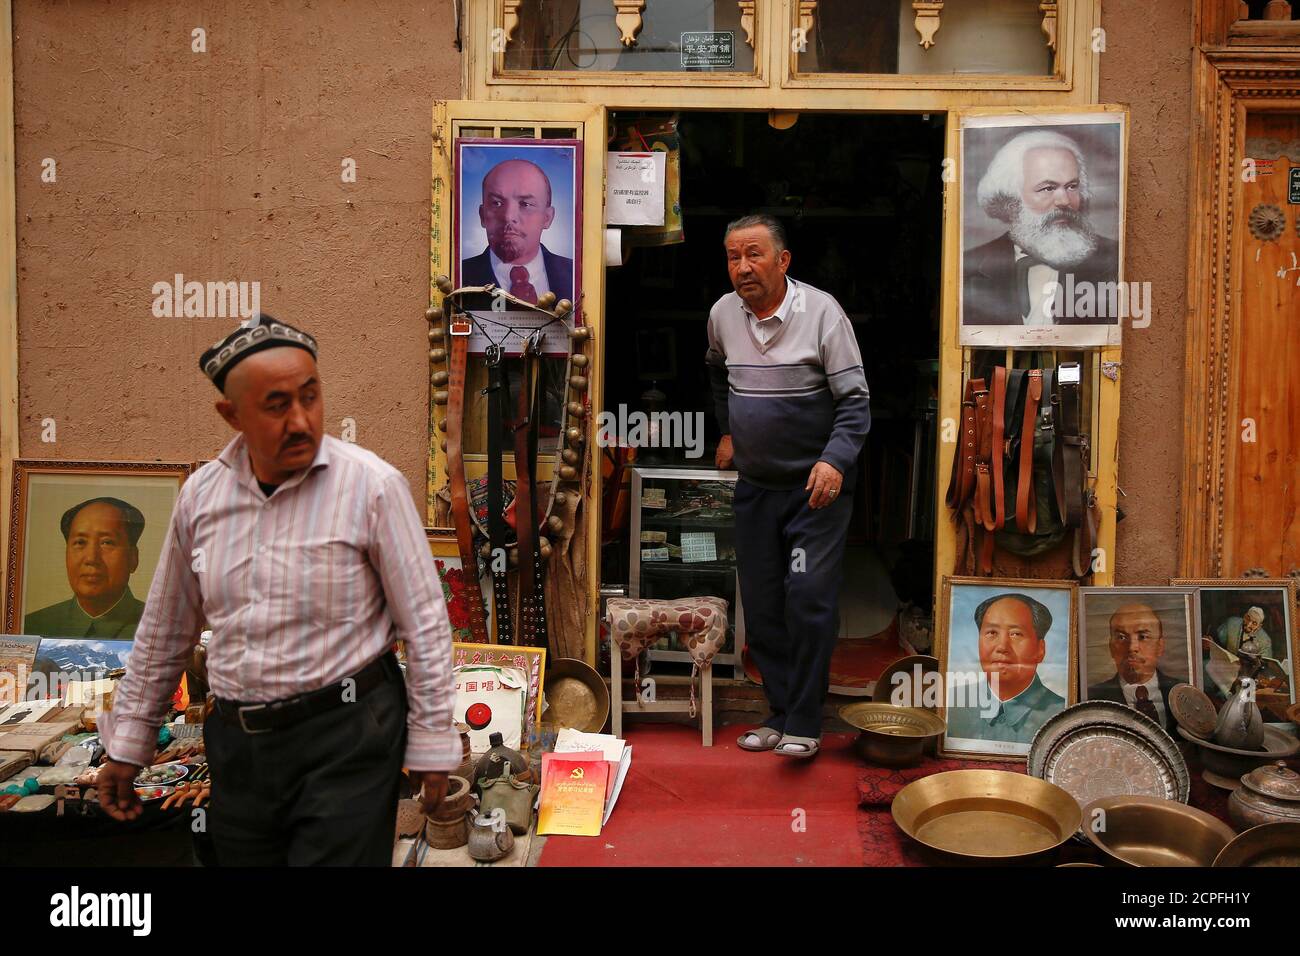 Portraits of China's late Chairman Mao Zedong, Soviet state founder Vladimir Lenin and German philosopher Karl Marx are displayed outside an antique shop in the old town in Kashgar, Xinjiang Uighur Autonomous Region, China, March 22, 2017.  REUTERS/Thomas Peter SEARCH "XINJIANG PETER" FOR THIS STORY. SEARCH "WIDER IMAGE" FOR ALL STORIES. Stock Photo